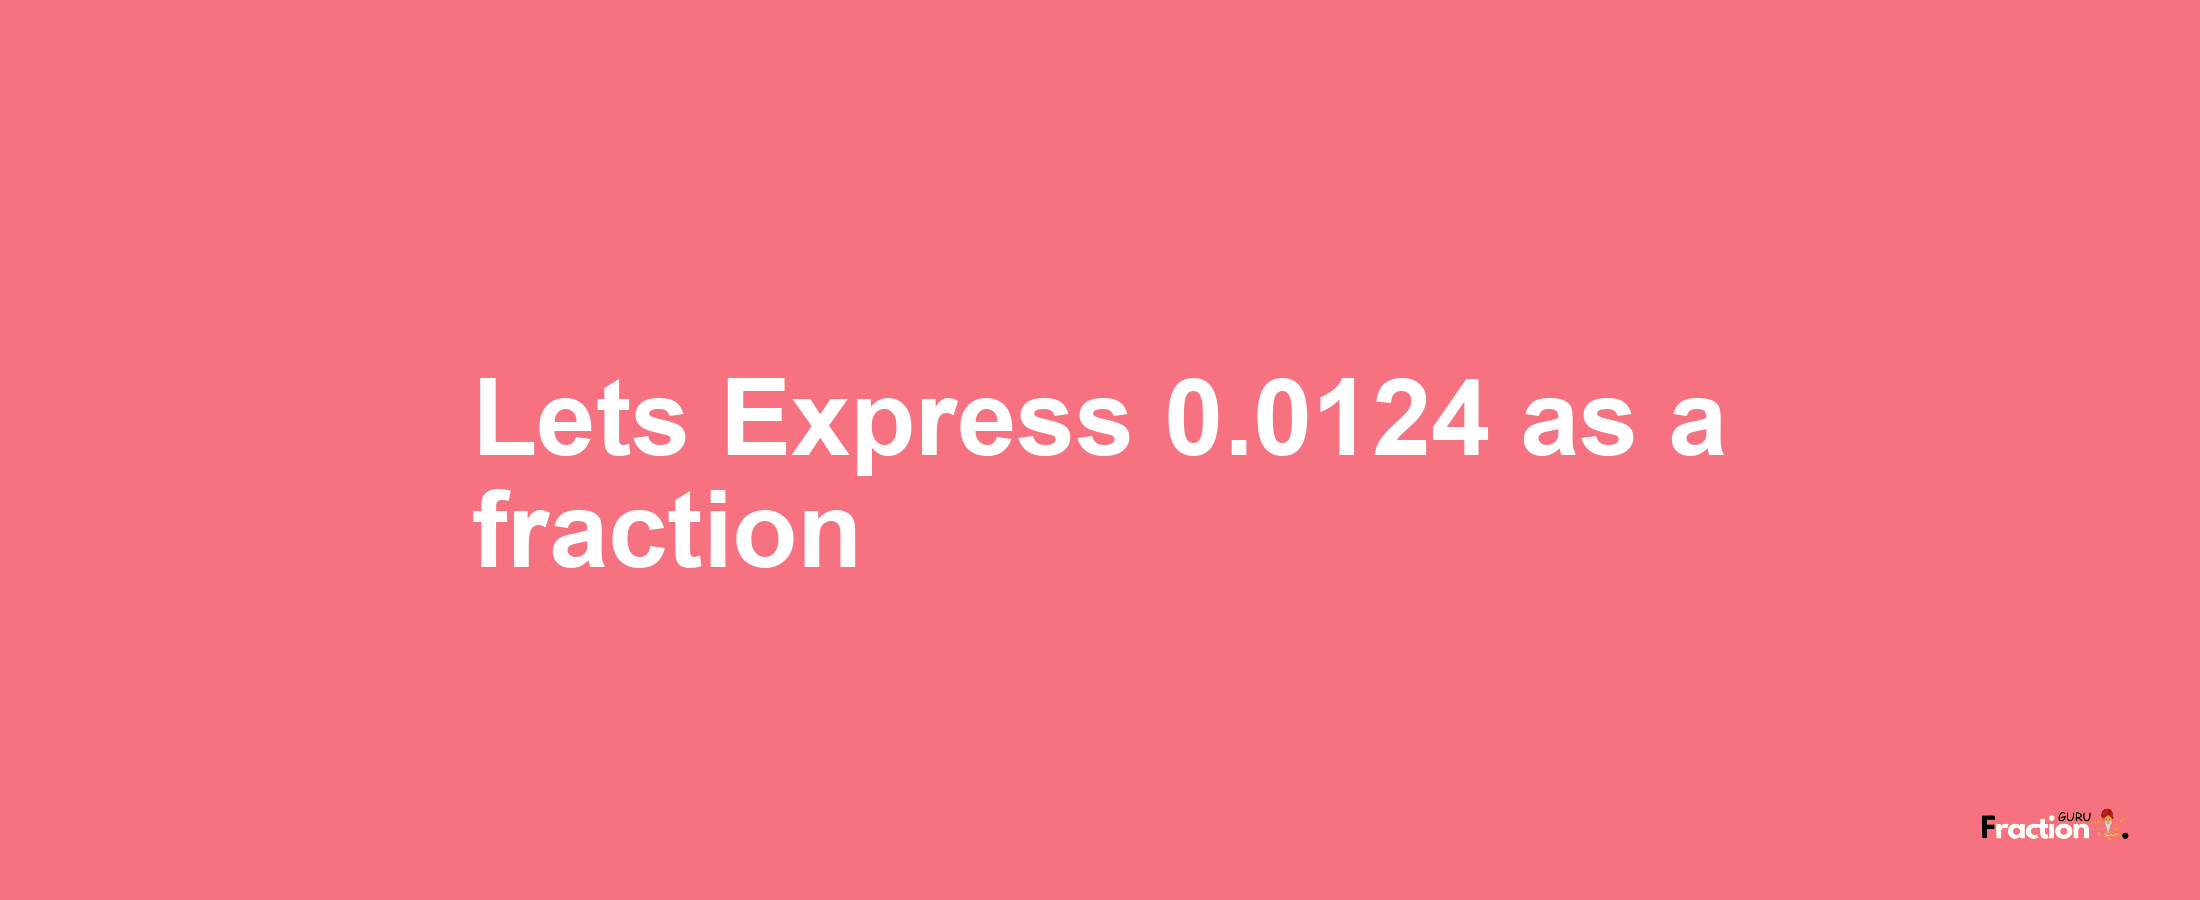 Lets Express 0.0124 as afraction